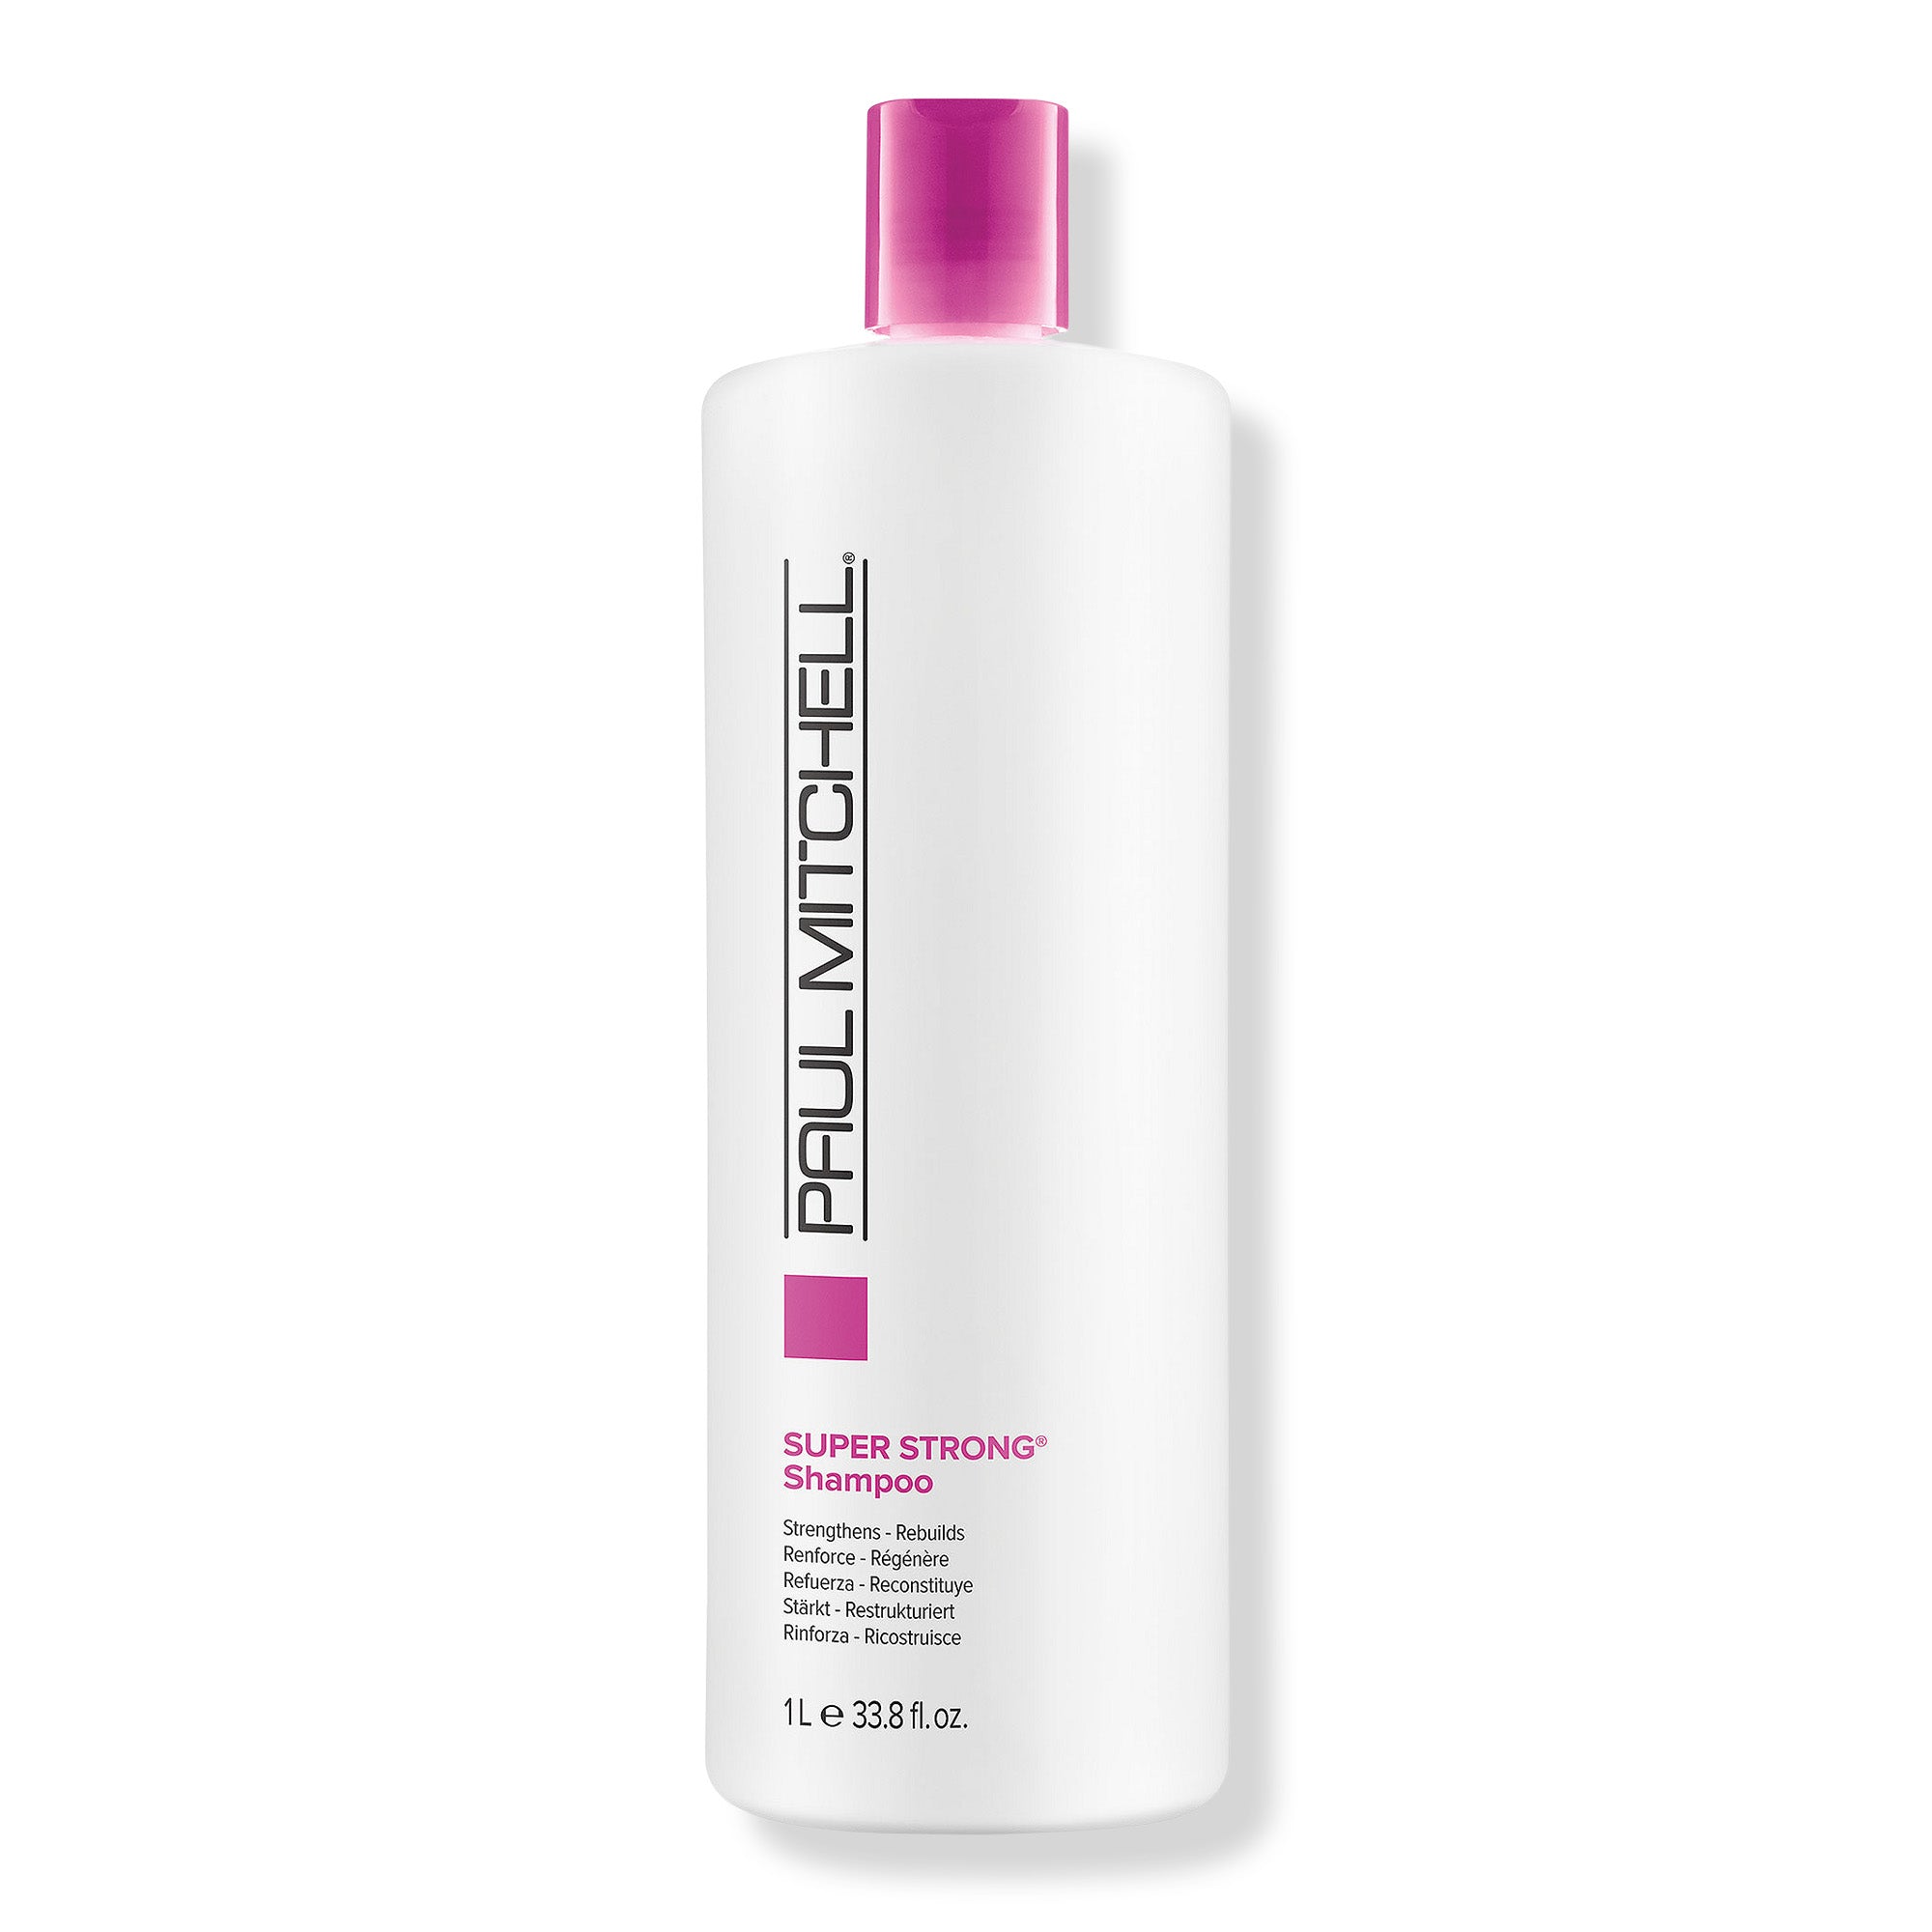 Paul Mitchell Strength Super Strong Shampoo & Conditioner Duo ($67.50 Value) / LITER